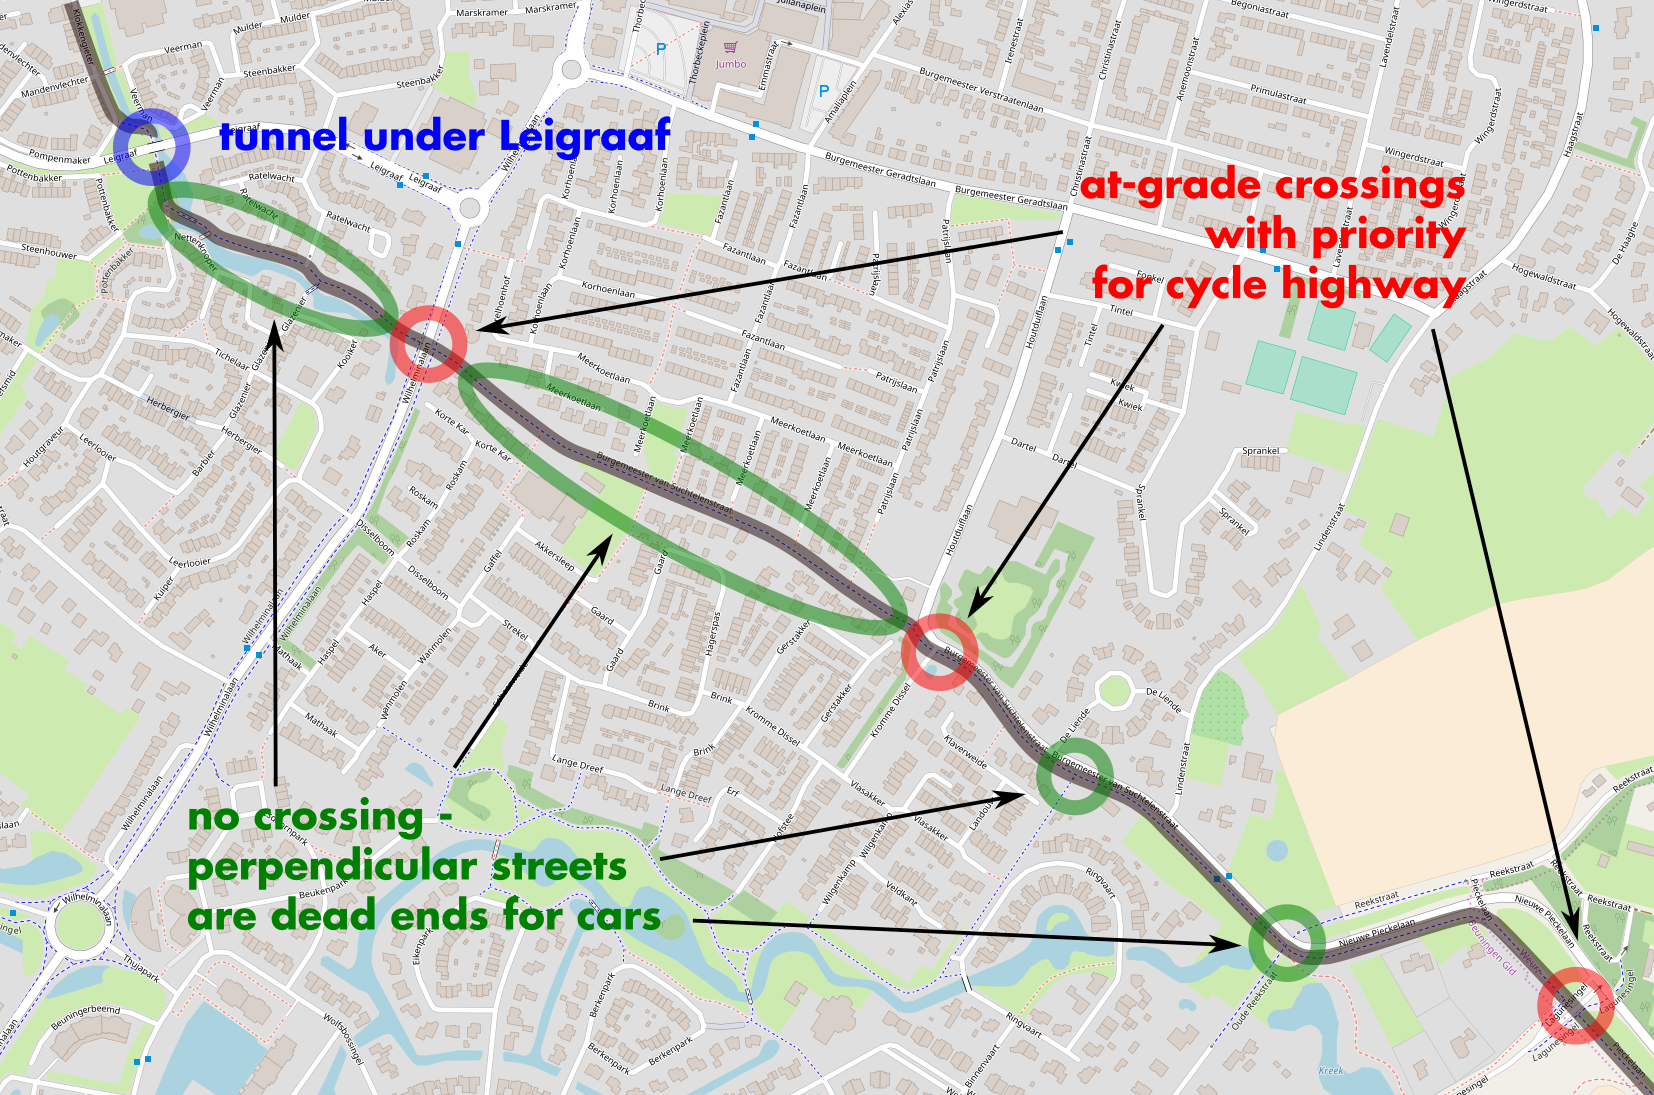 Cycle highway (grey line) and filtered permeability: cars can cross the cycle highway only in 4 places, pedestrians and cyclists have 10 additional local connections in between.